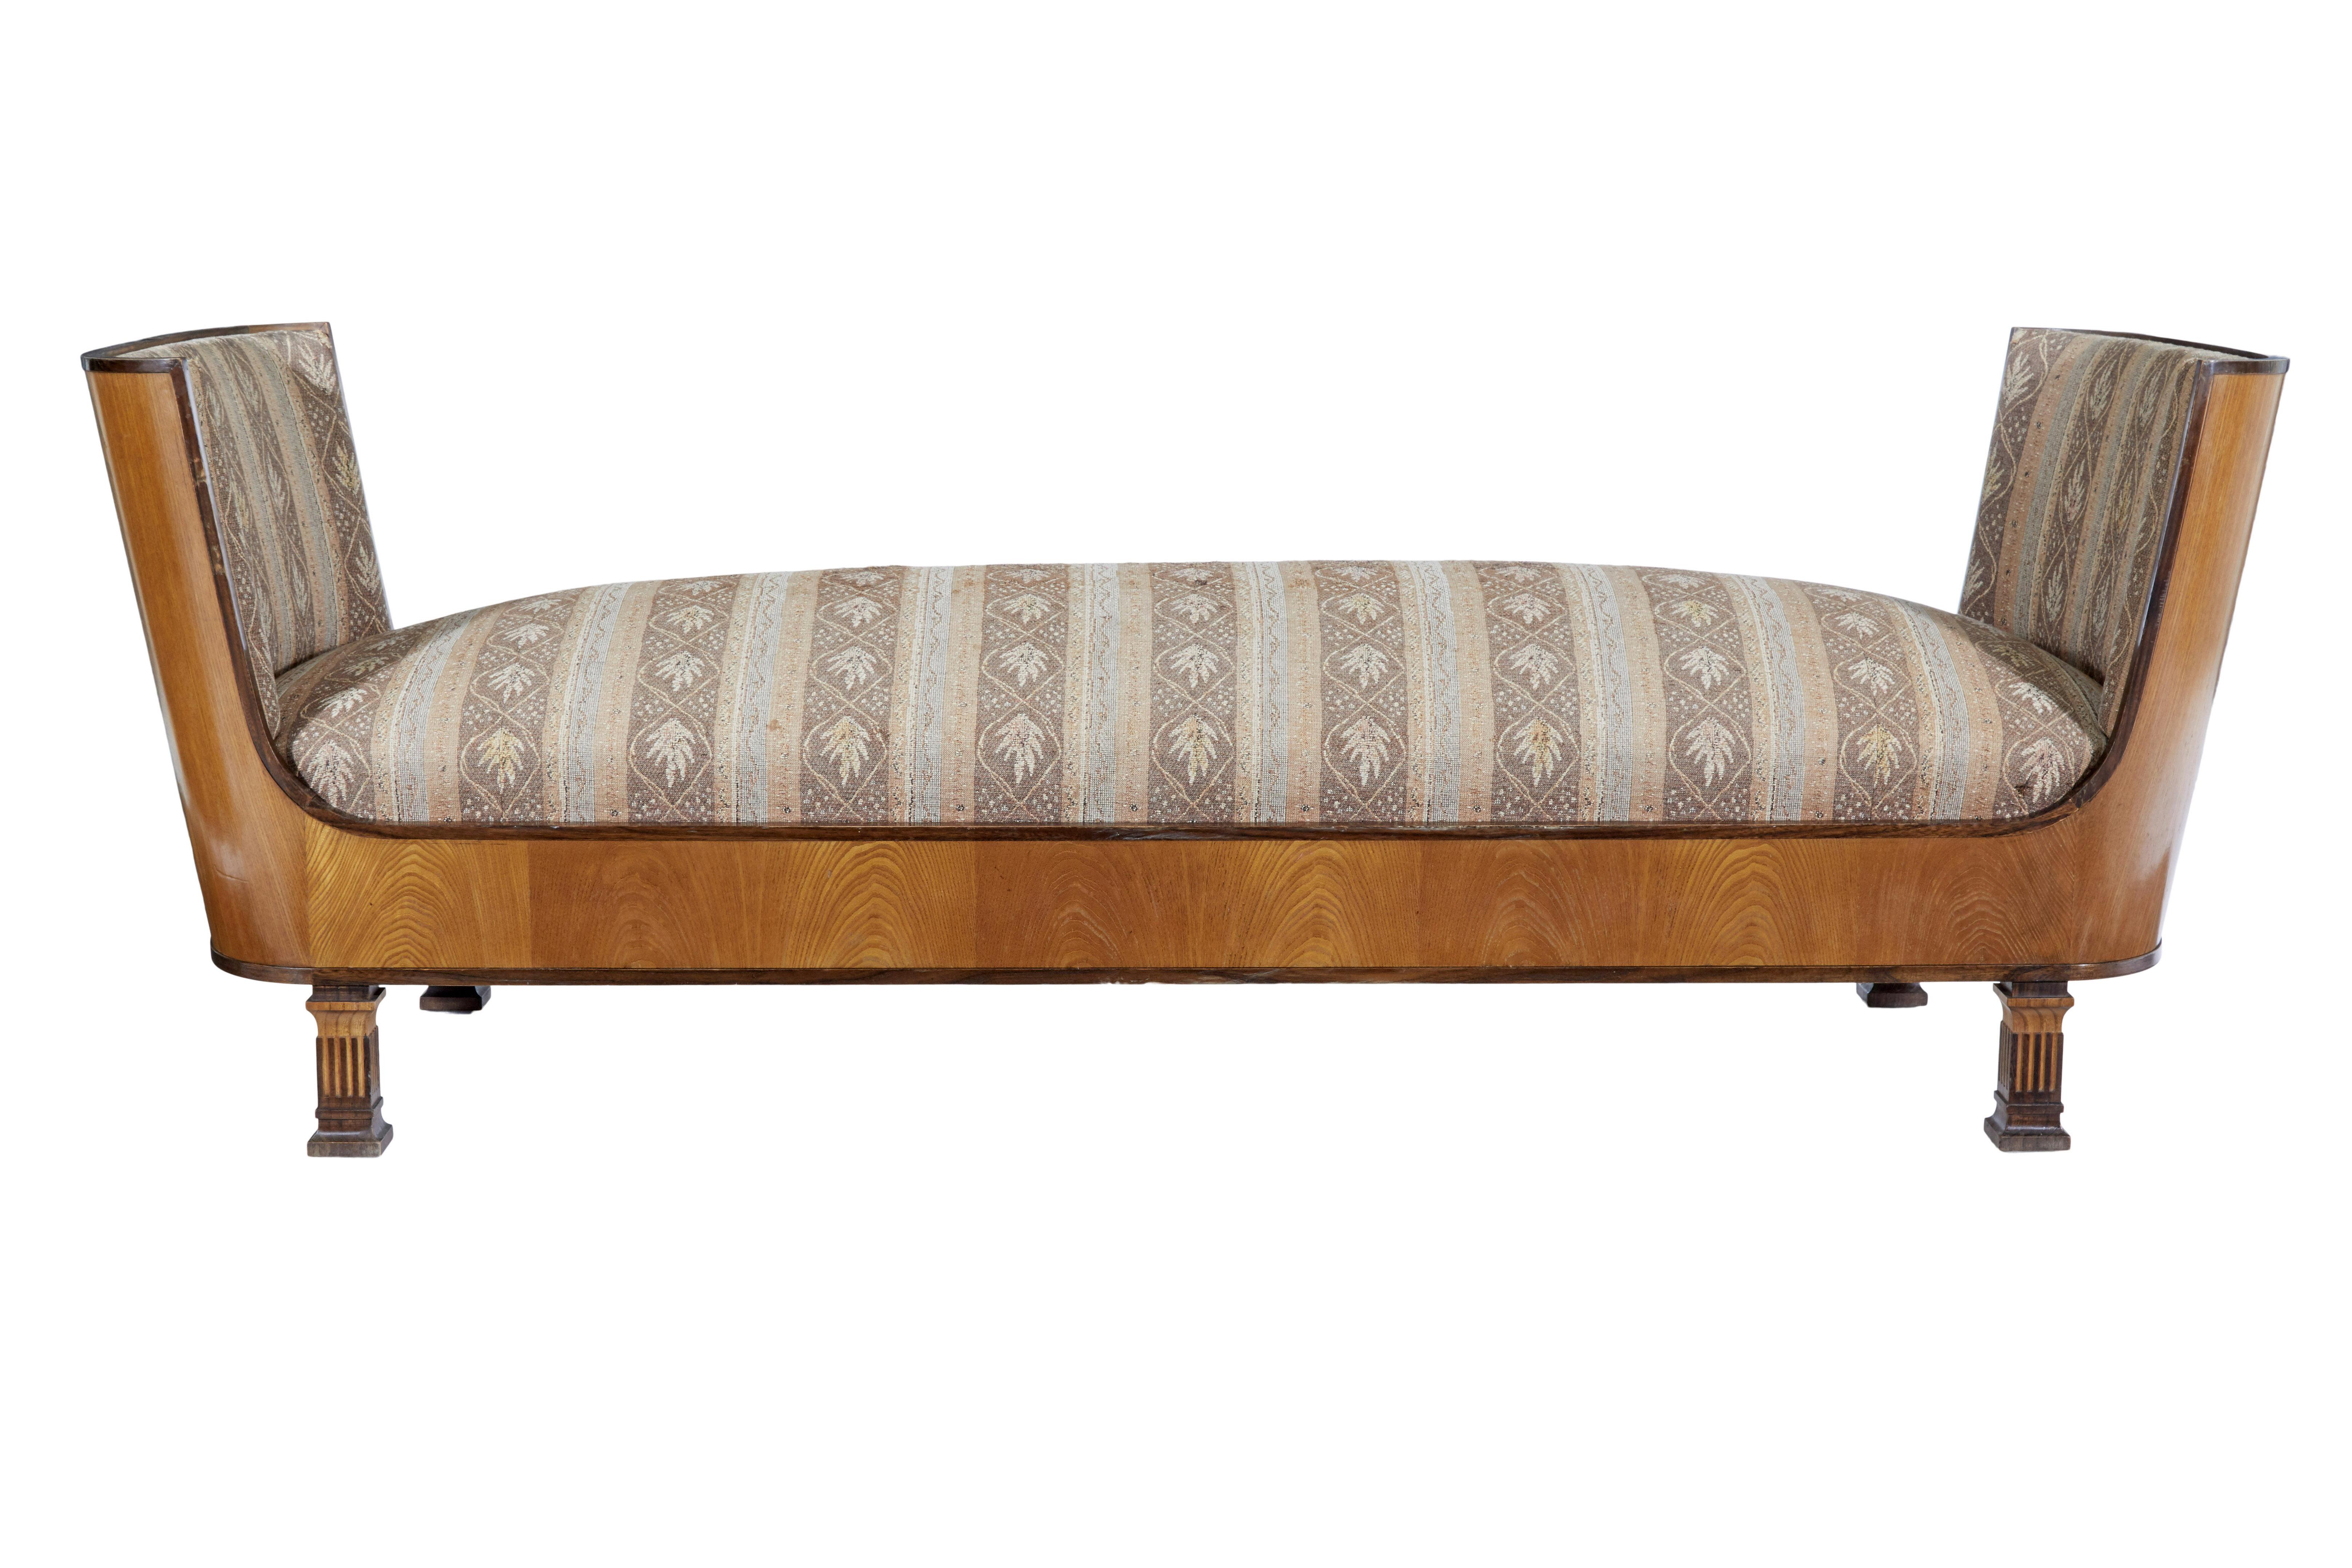 Erik Chambert art deco elm and birch daybed circa 1930.

Stunning shaped daybed by well known designer Erik Chambert (1902-1988)

Shaped ends wrapped round with elm veneer and birch edging, fitted with a removable seat and a rest each end. 